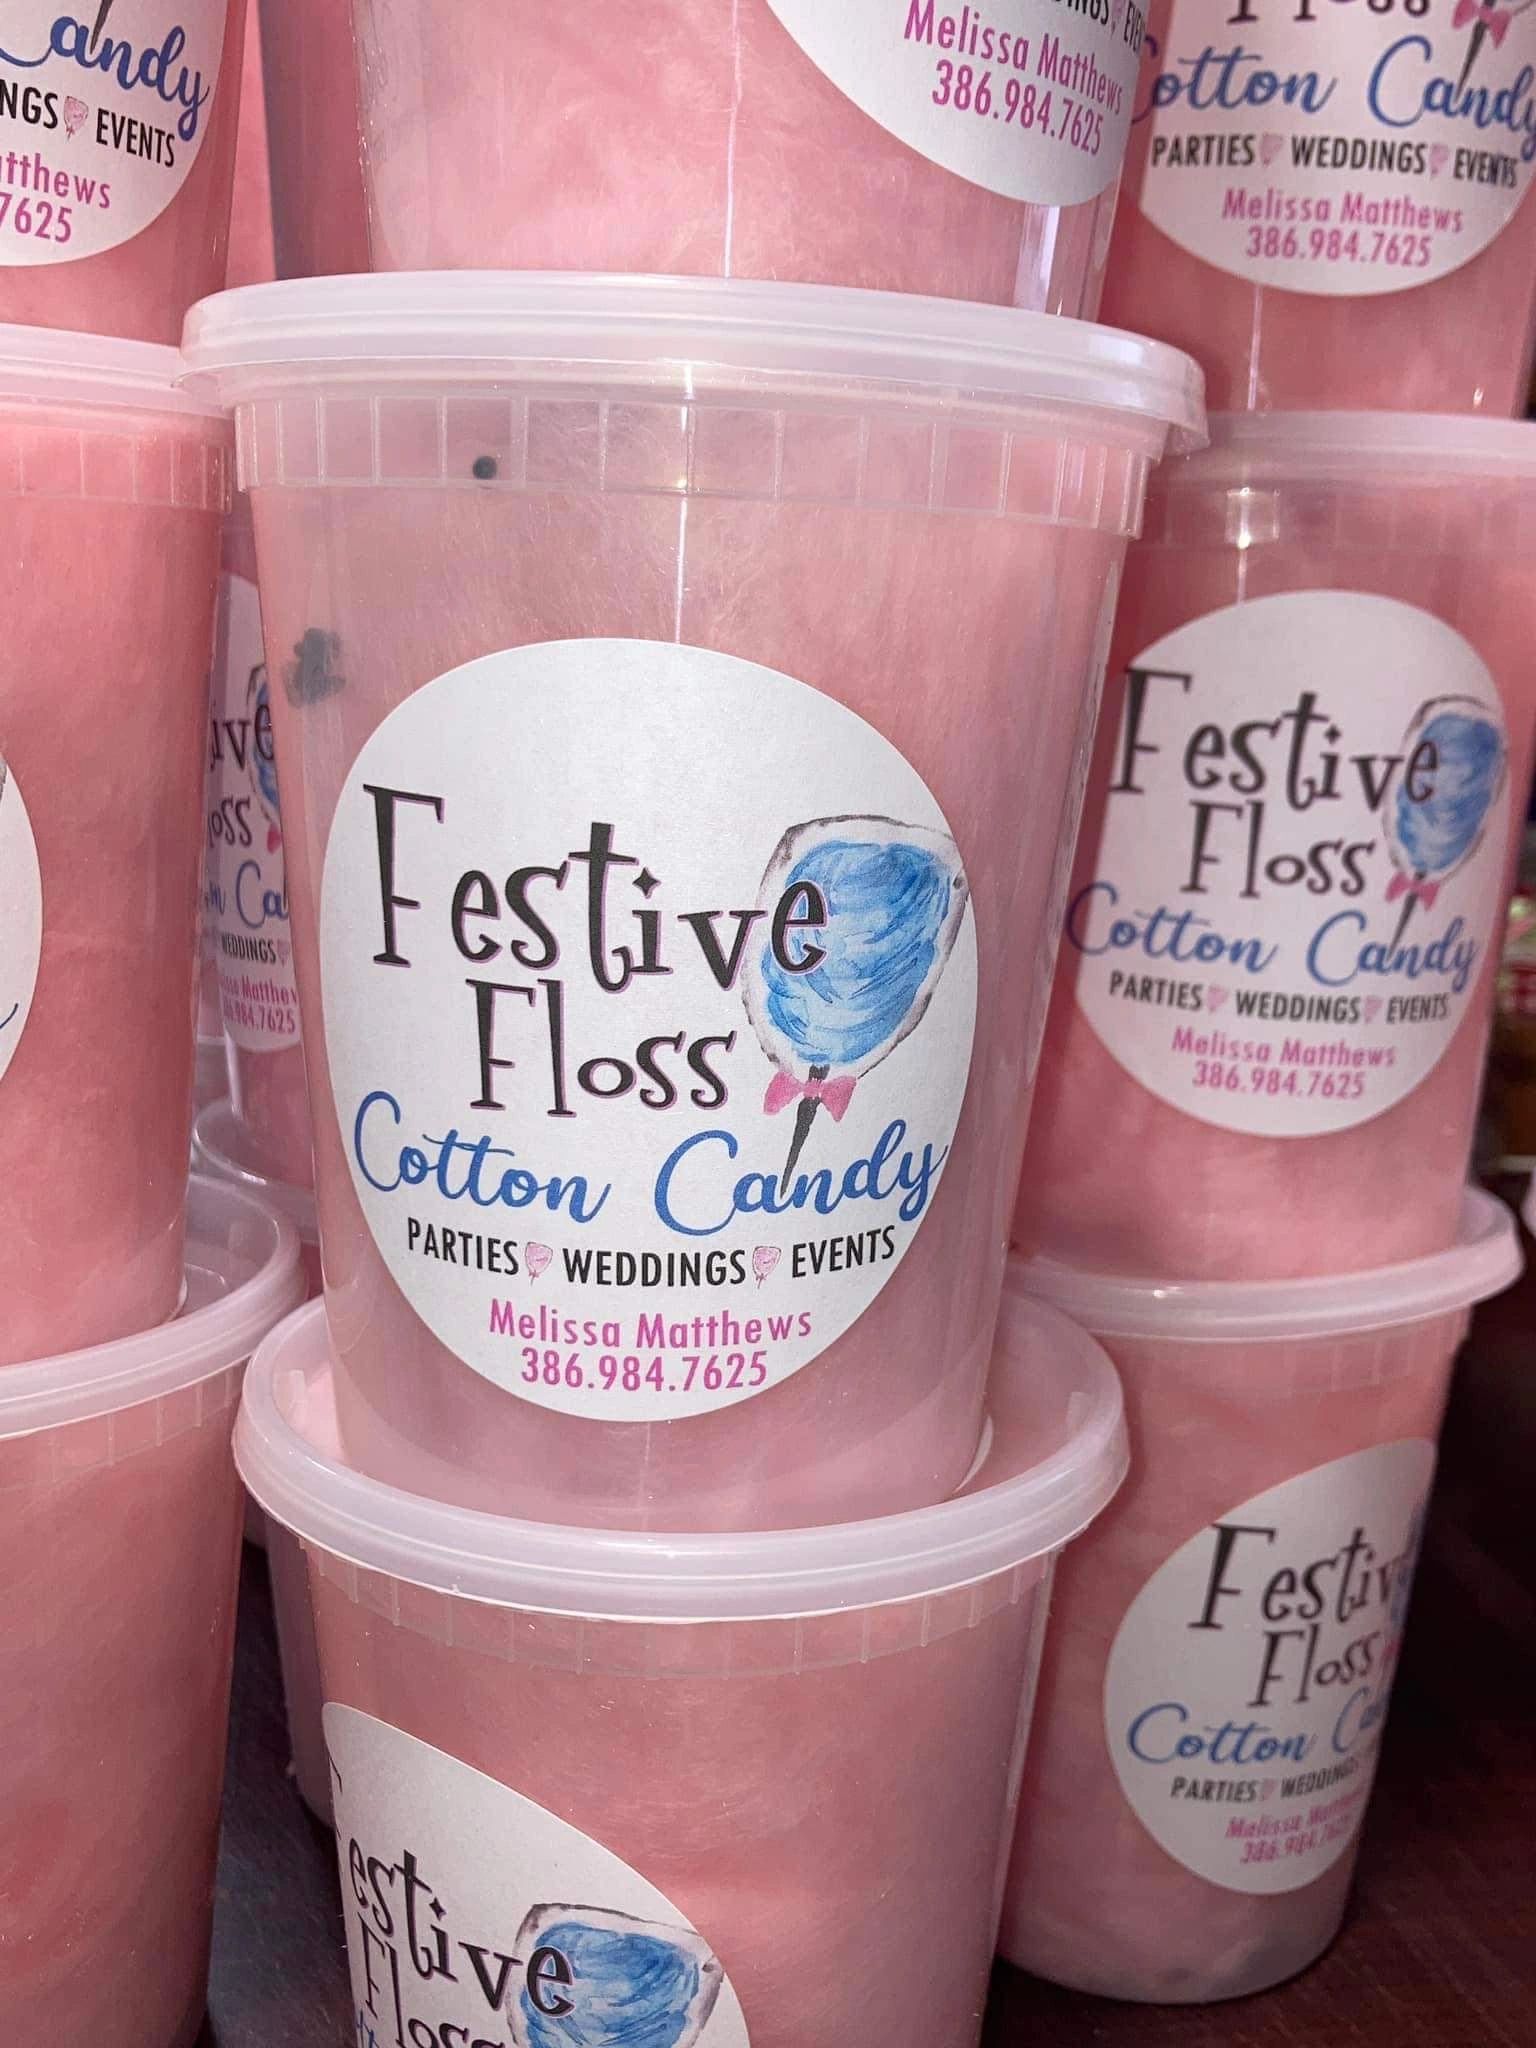 Buy Cotton Candy Online - Festive Floss Cotton Candy